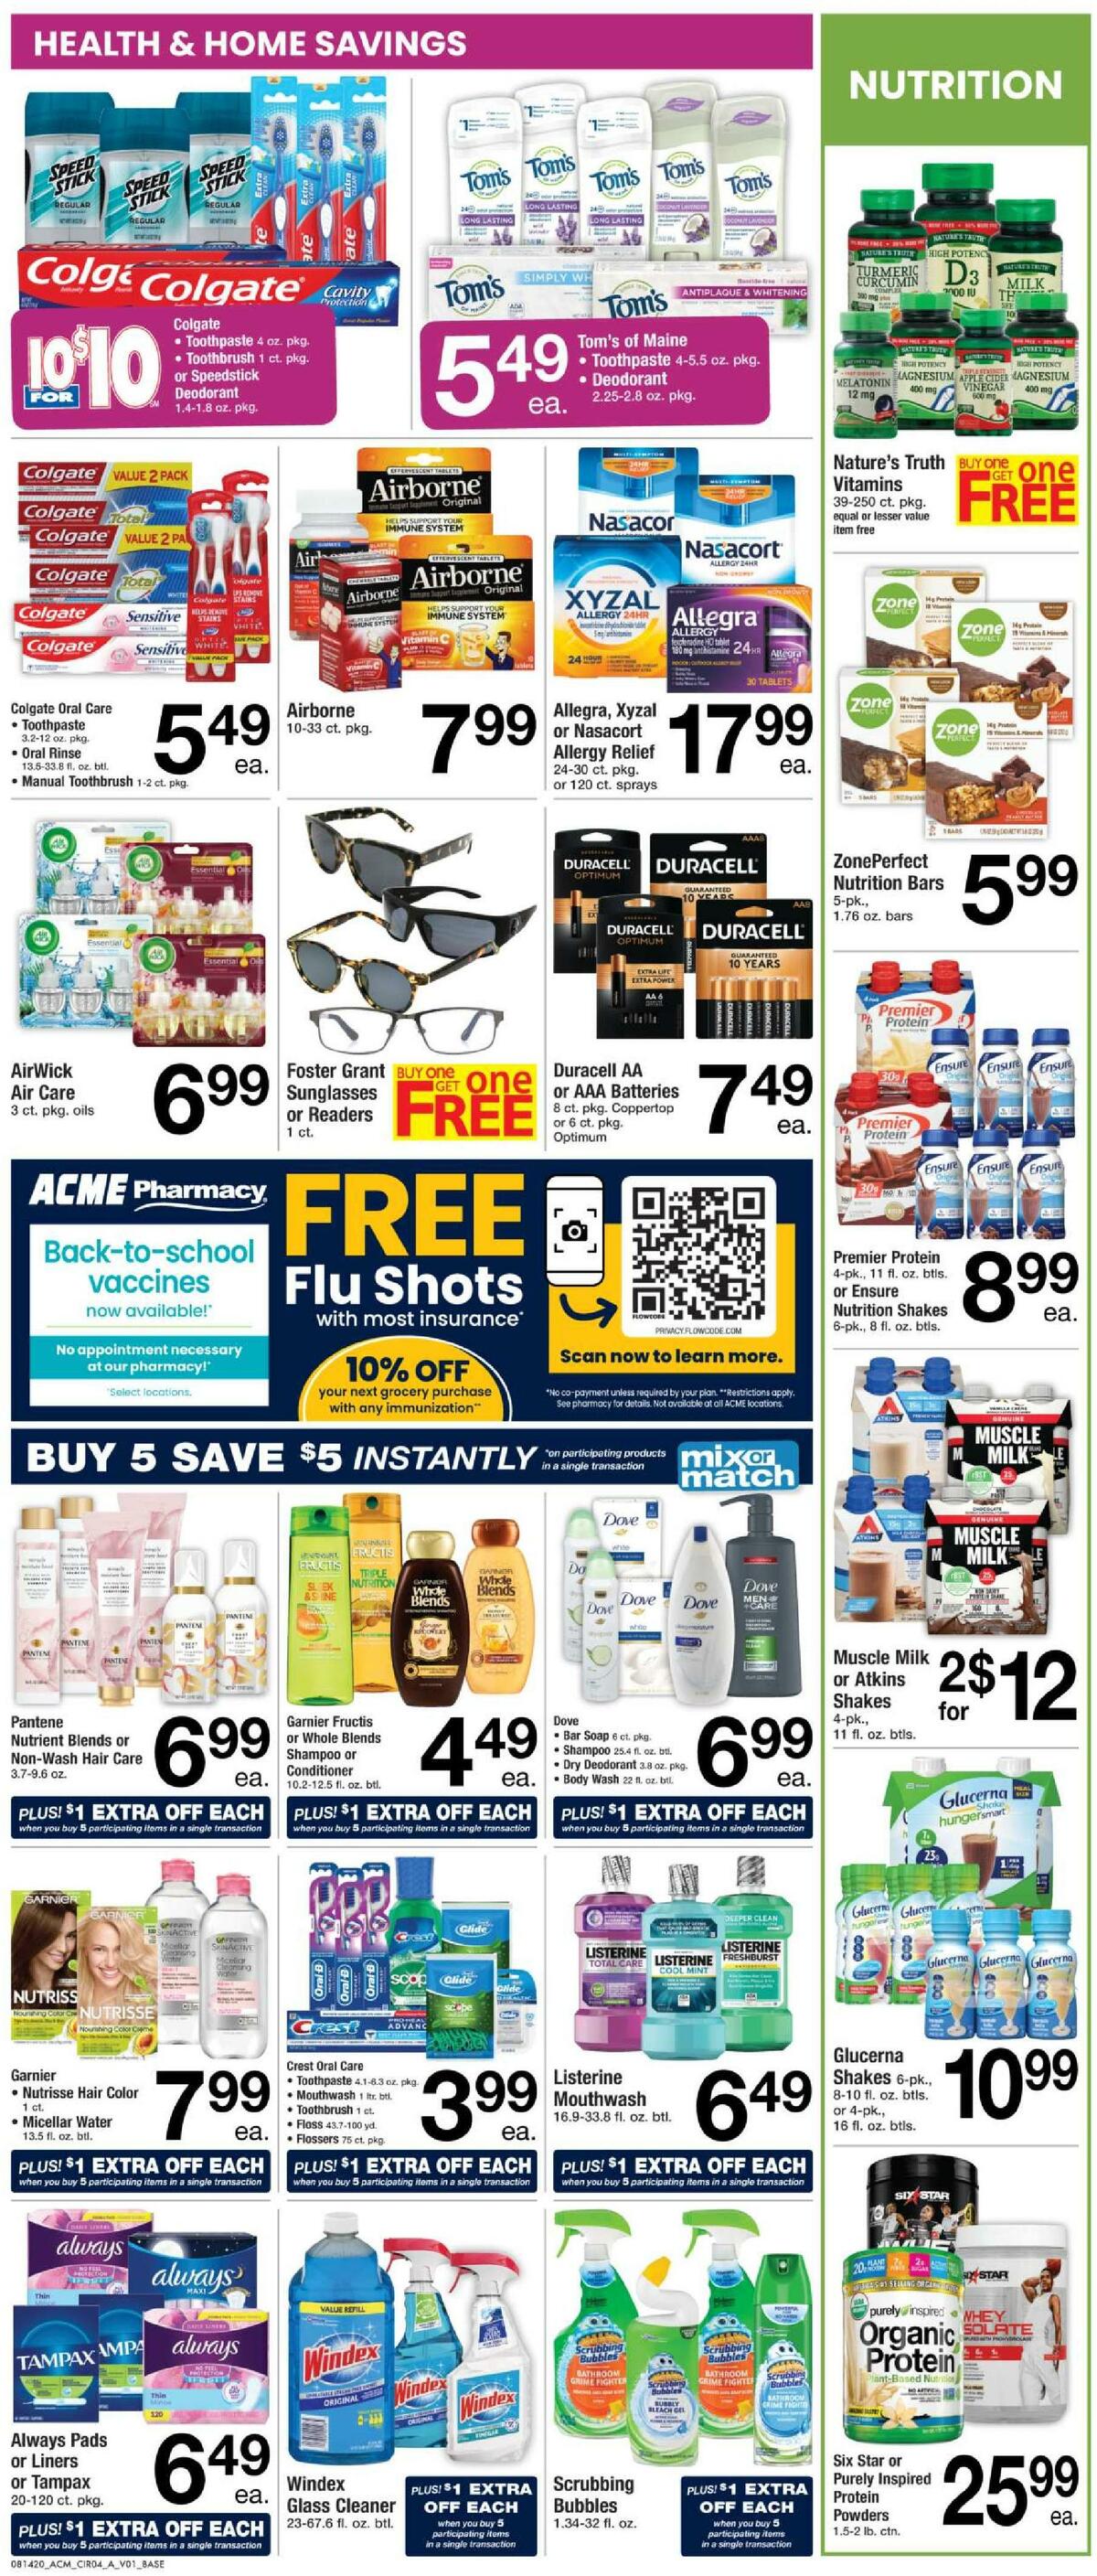 ACME Markets Weekly Ad from August 14